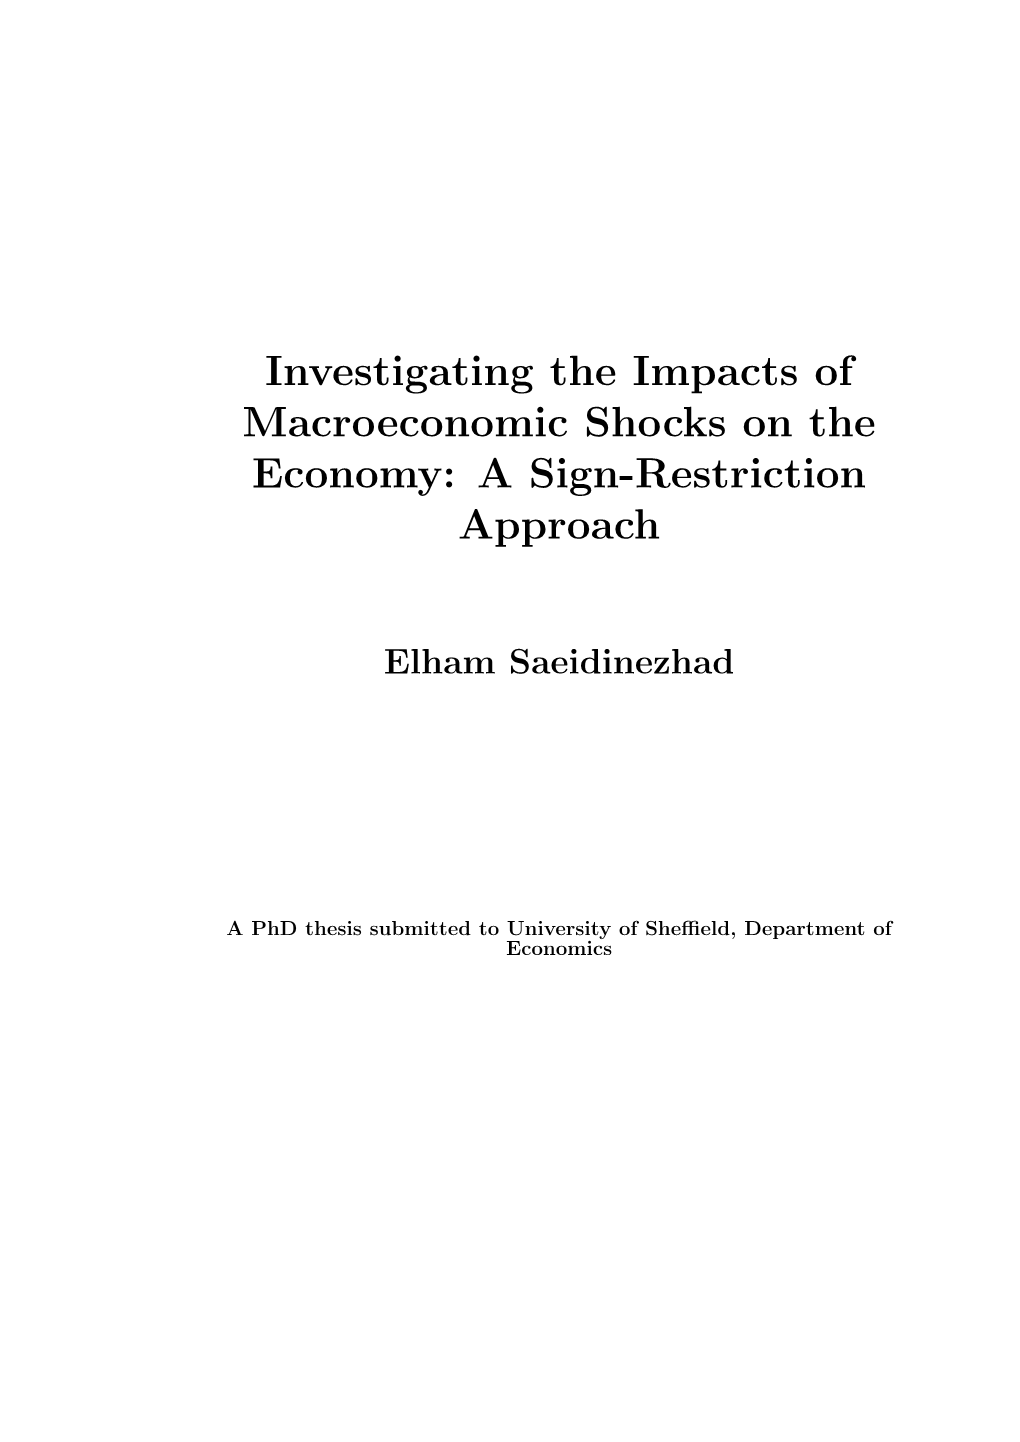 Investigating the Impacts of Macroeconomic Shocks on the Economy: a Sign-Restriction Approach